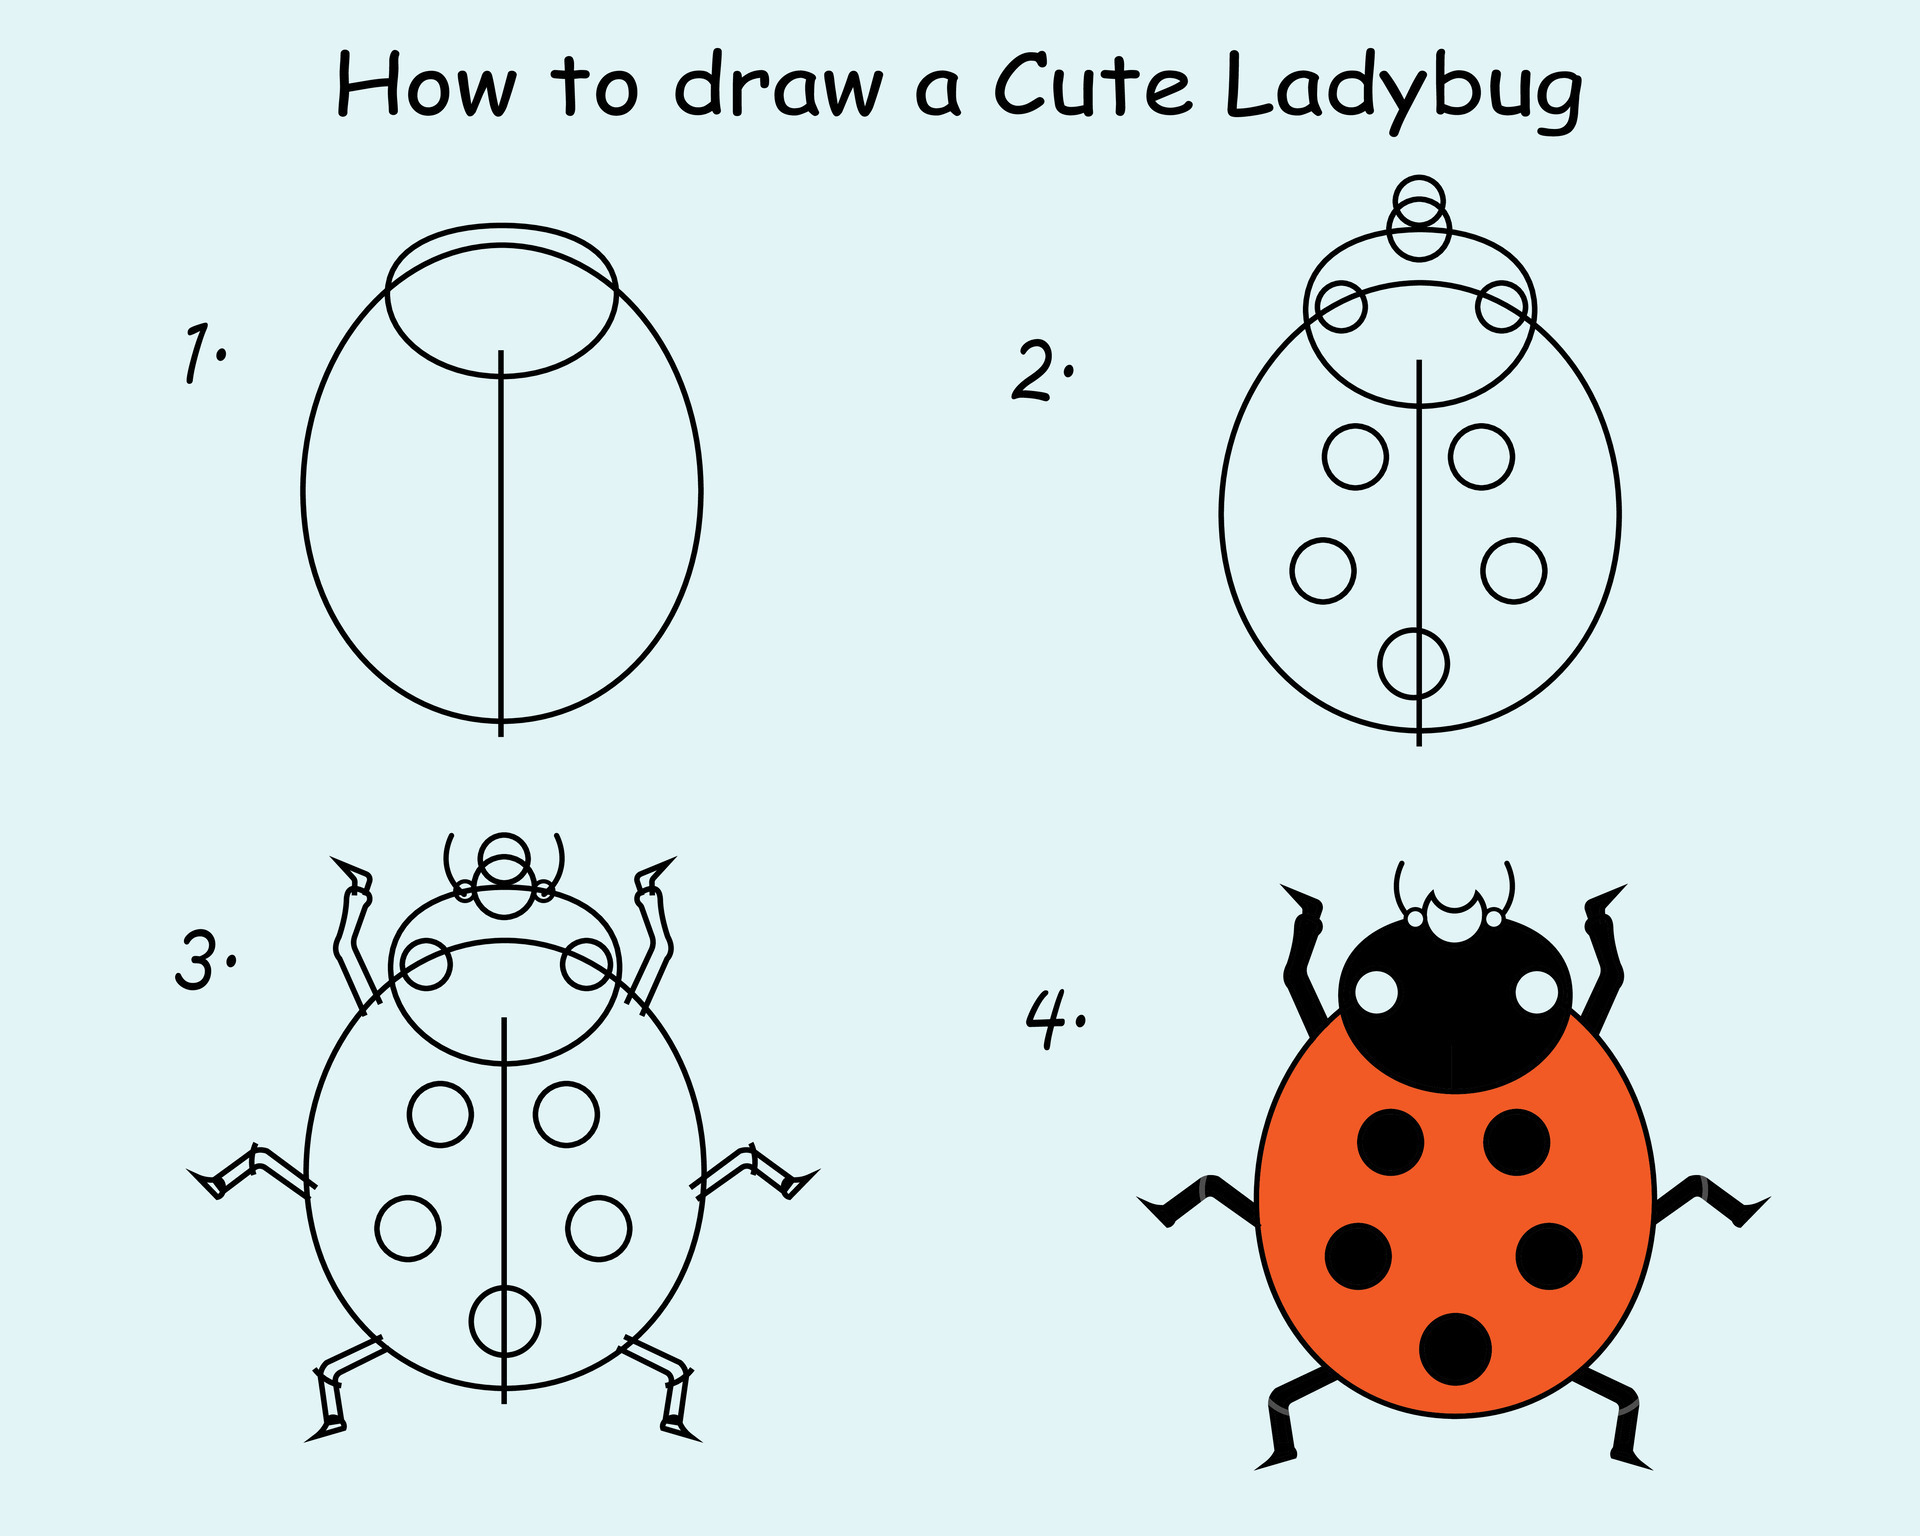 https://static.vecteezy.com/system/resources/previews/027/460/091/original/step-to-step-draw-a-cute-ladybug-good-for-drawing-child-kid-illustration-illustration-free-vector.jpg